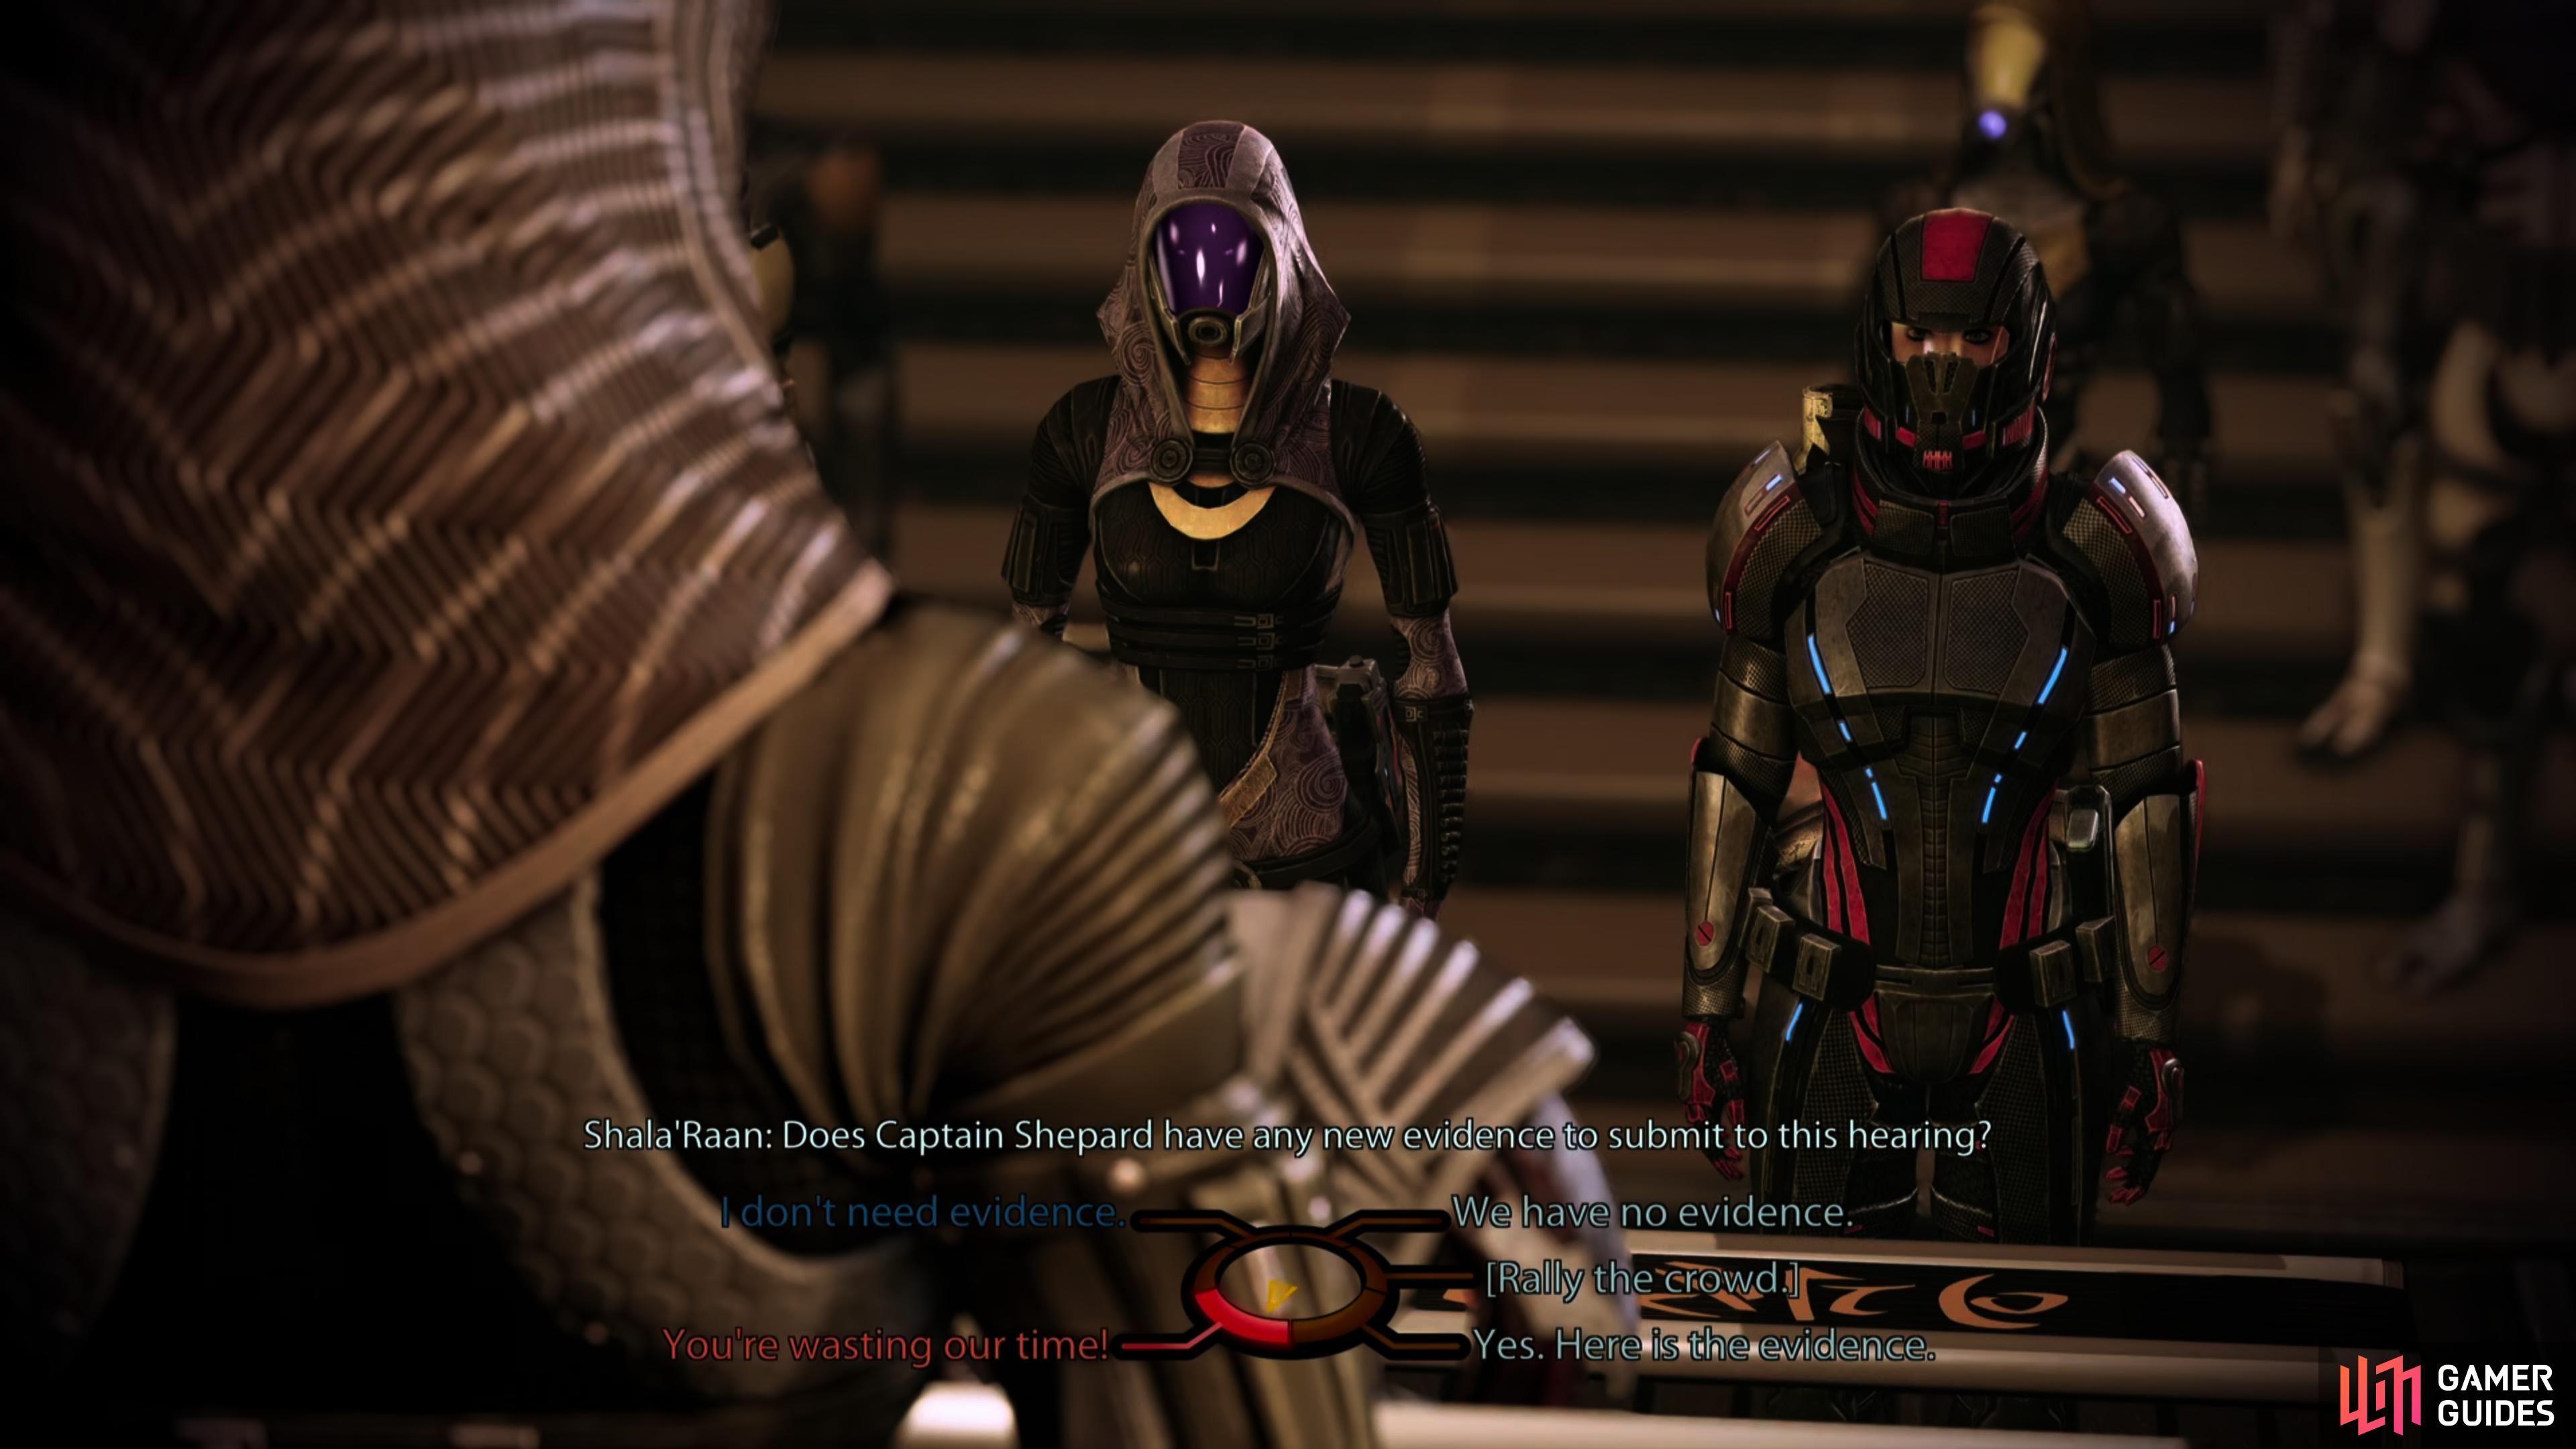 When you return to the tribunal, be sure to withhold the evidence to earn Tali's loyalty.